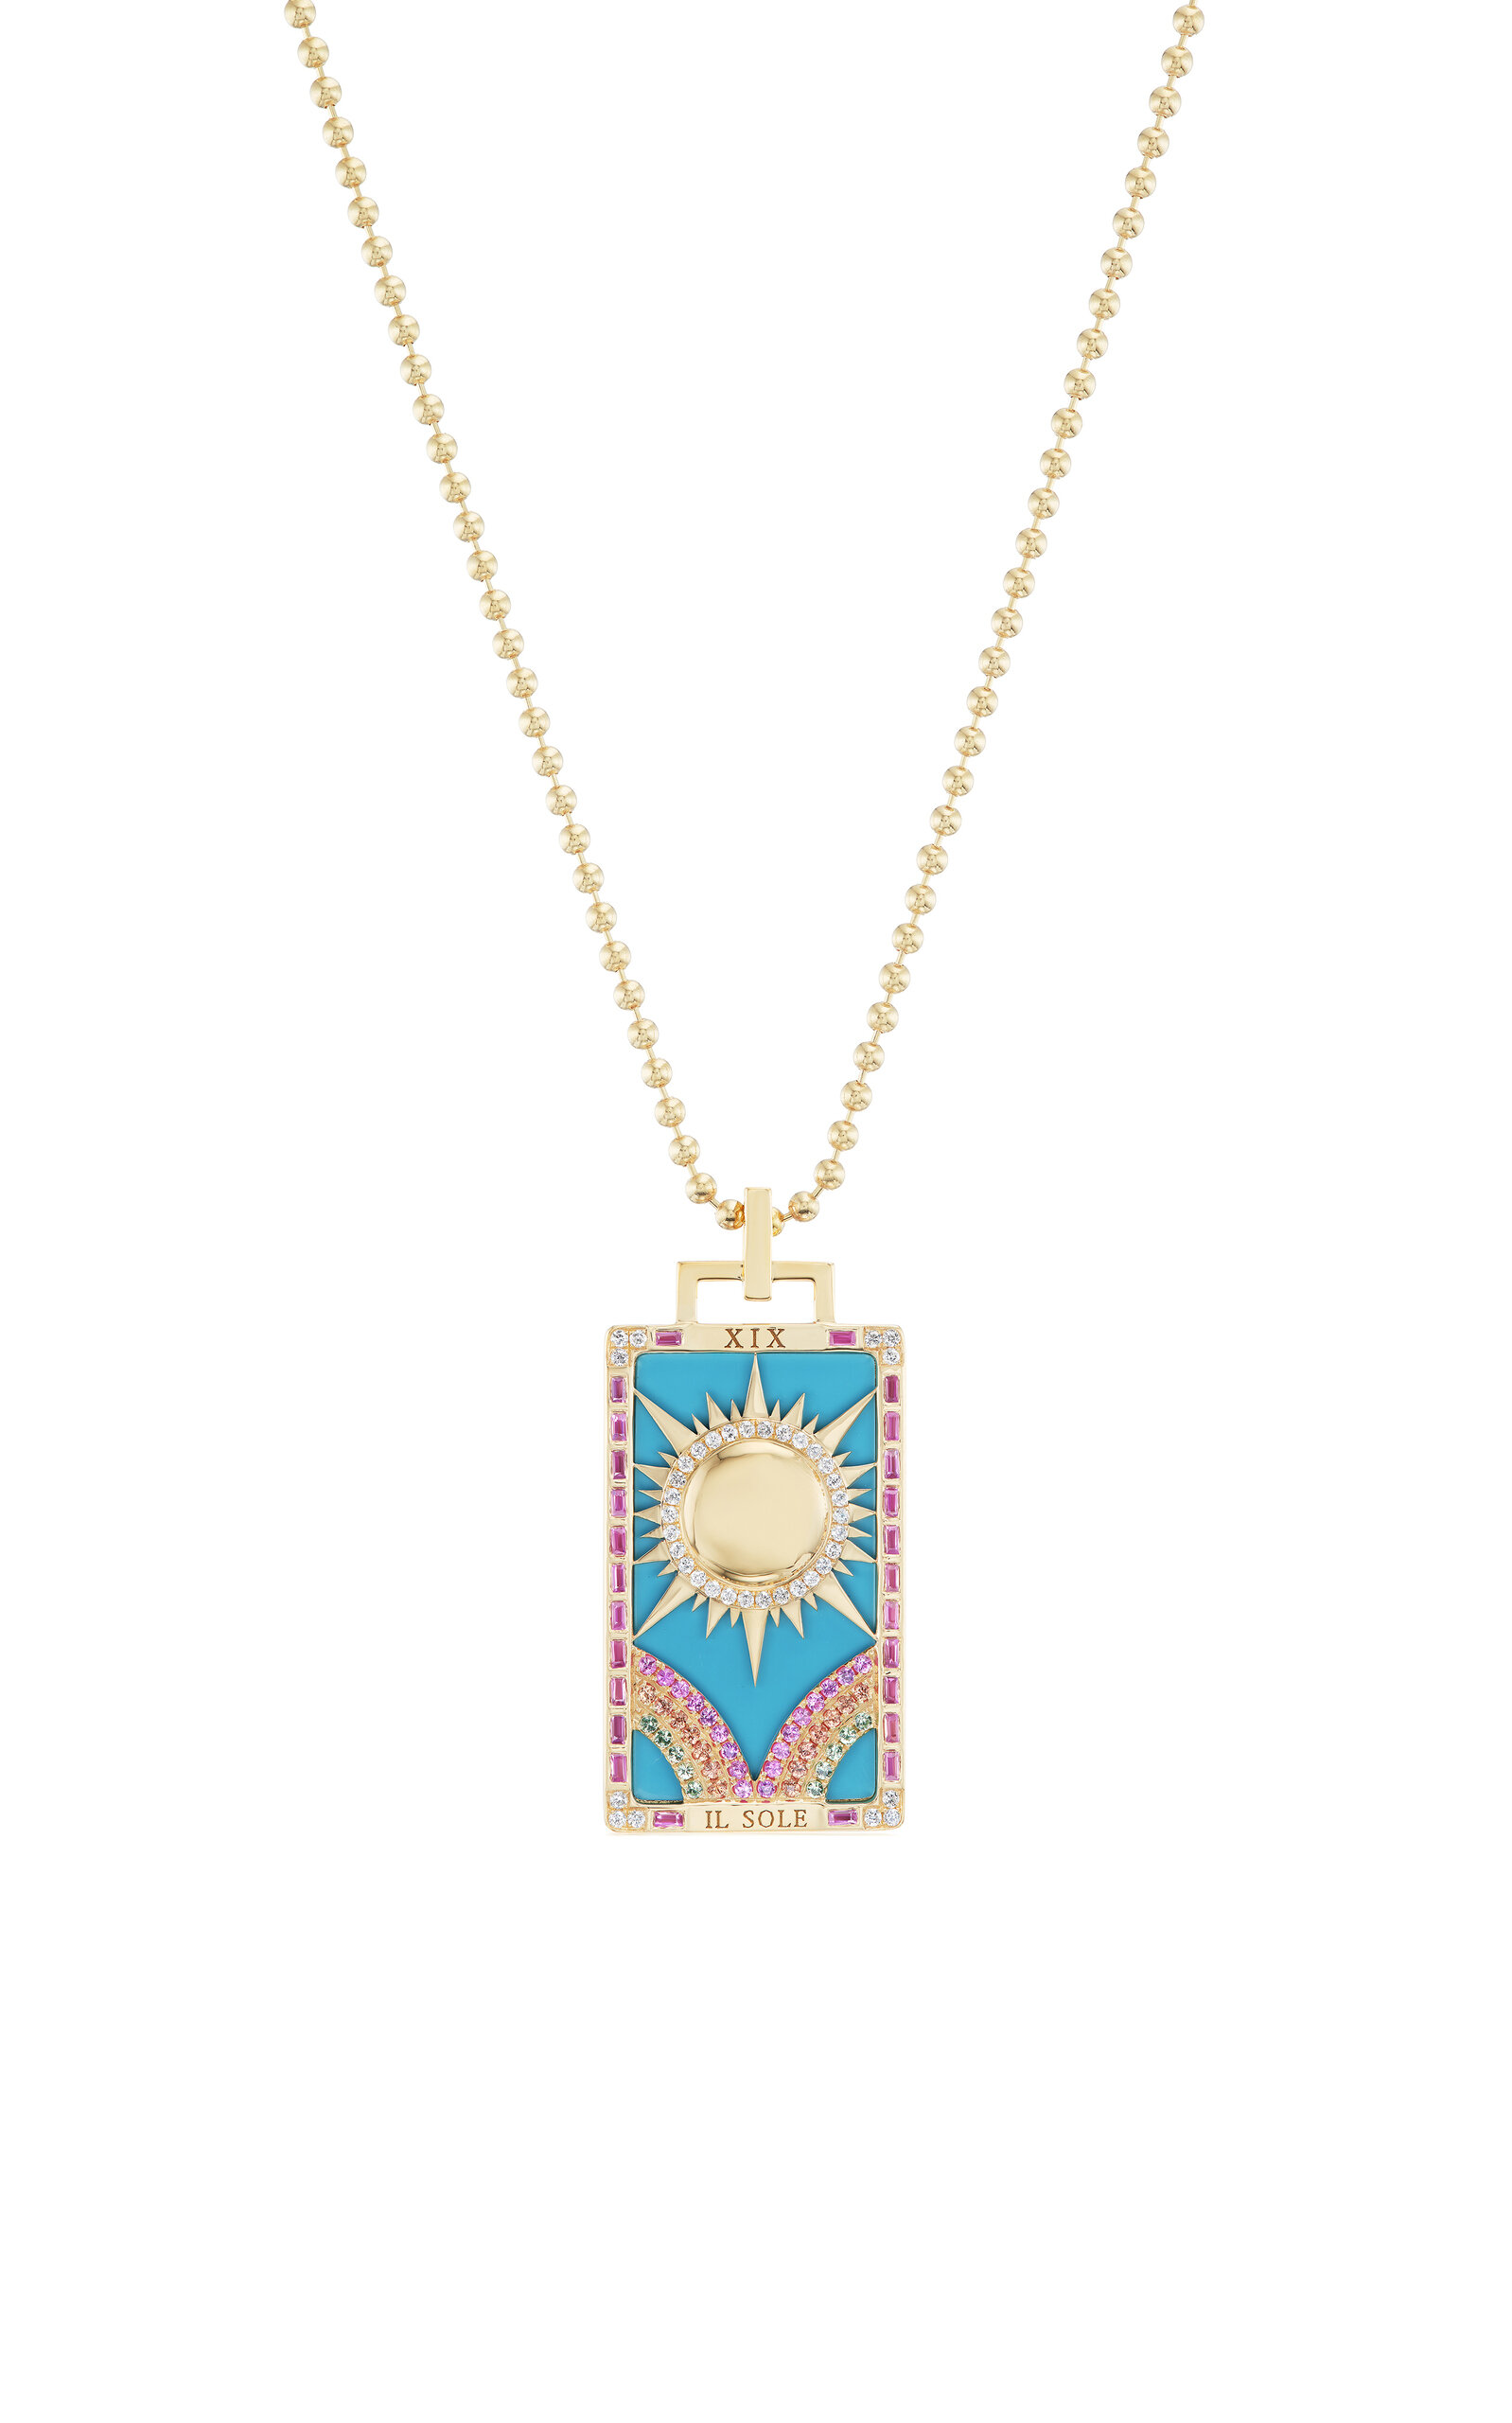 Il Sole Piccola 18K Yellow Gold Turquoise Tarot Card Necklace